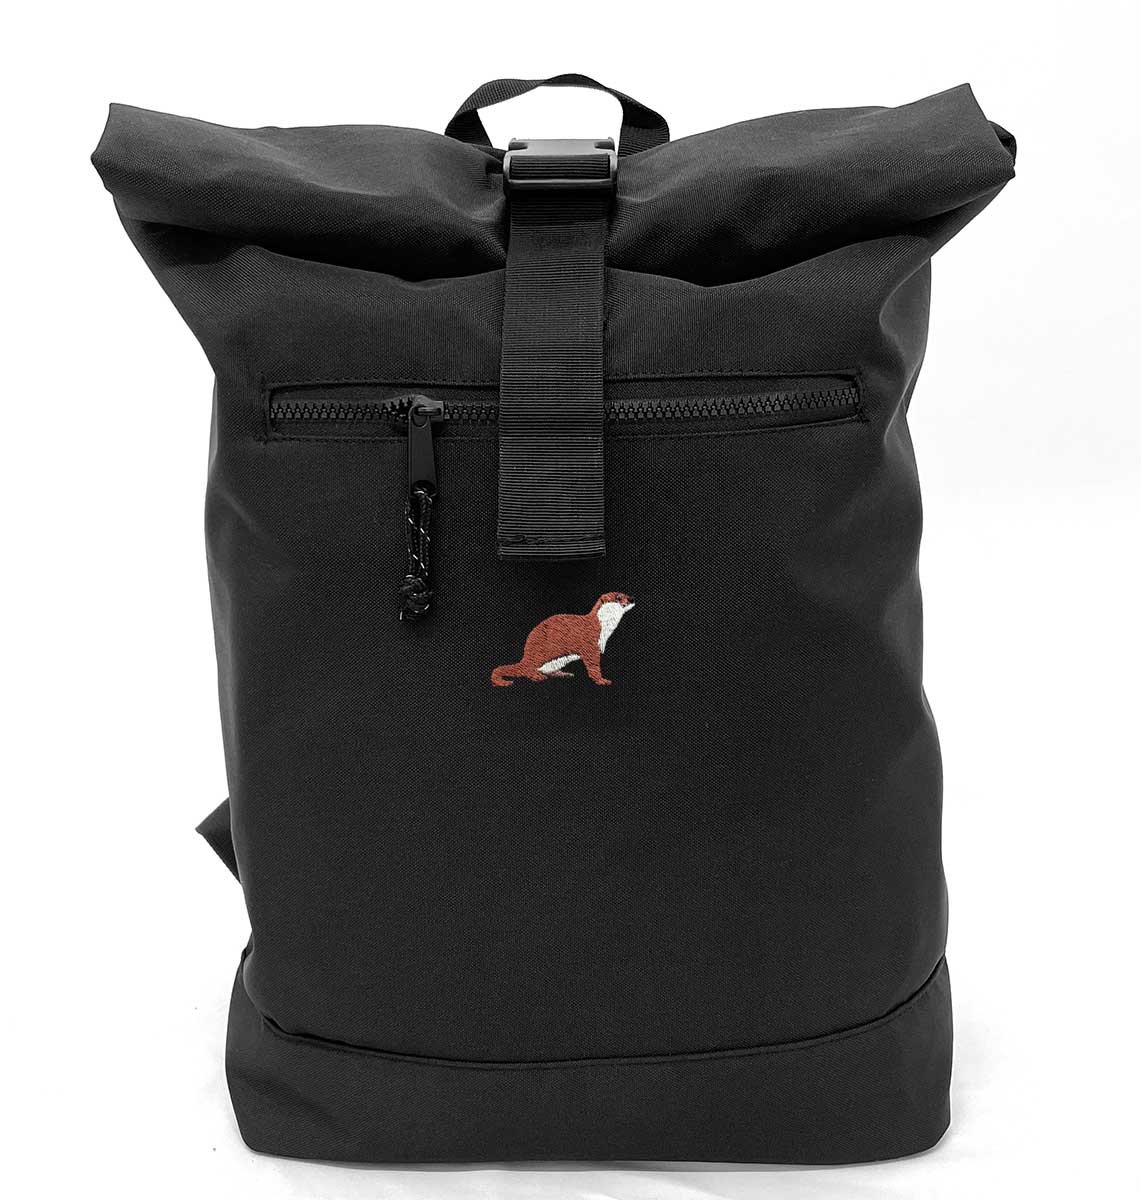 Otter Beach Roll-top Recycled Backpack - Blue Panda